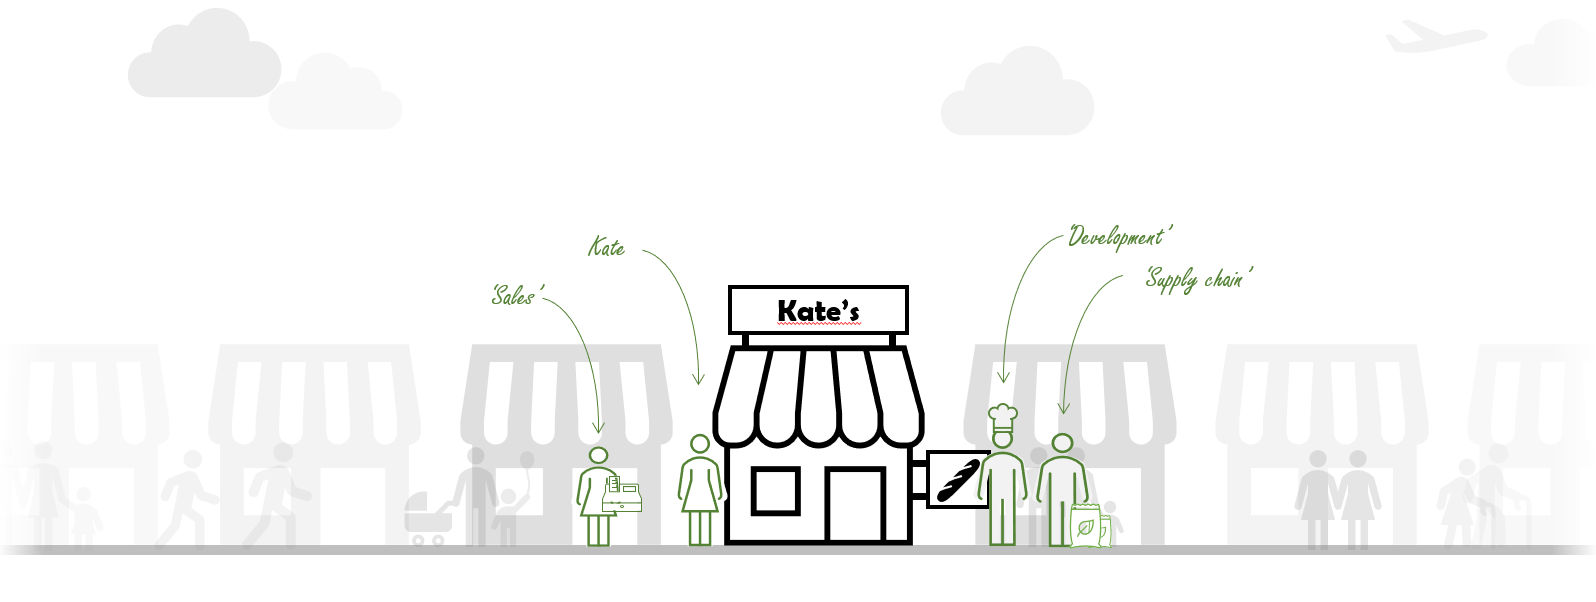 Kate’s bakery is expanding with some new roles in her organisation